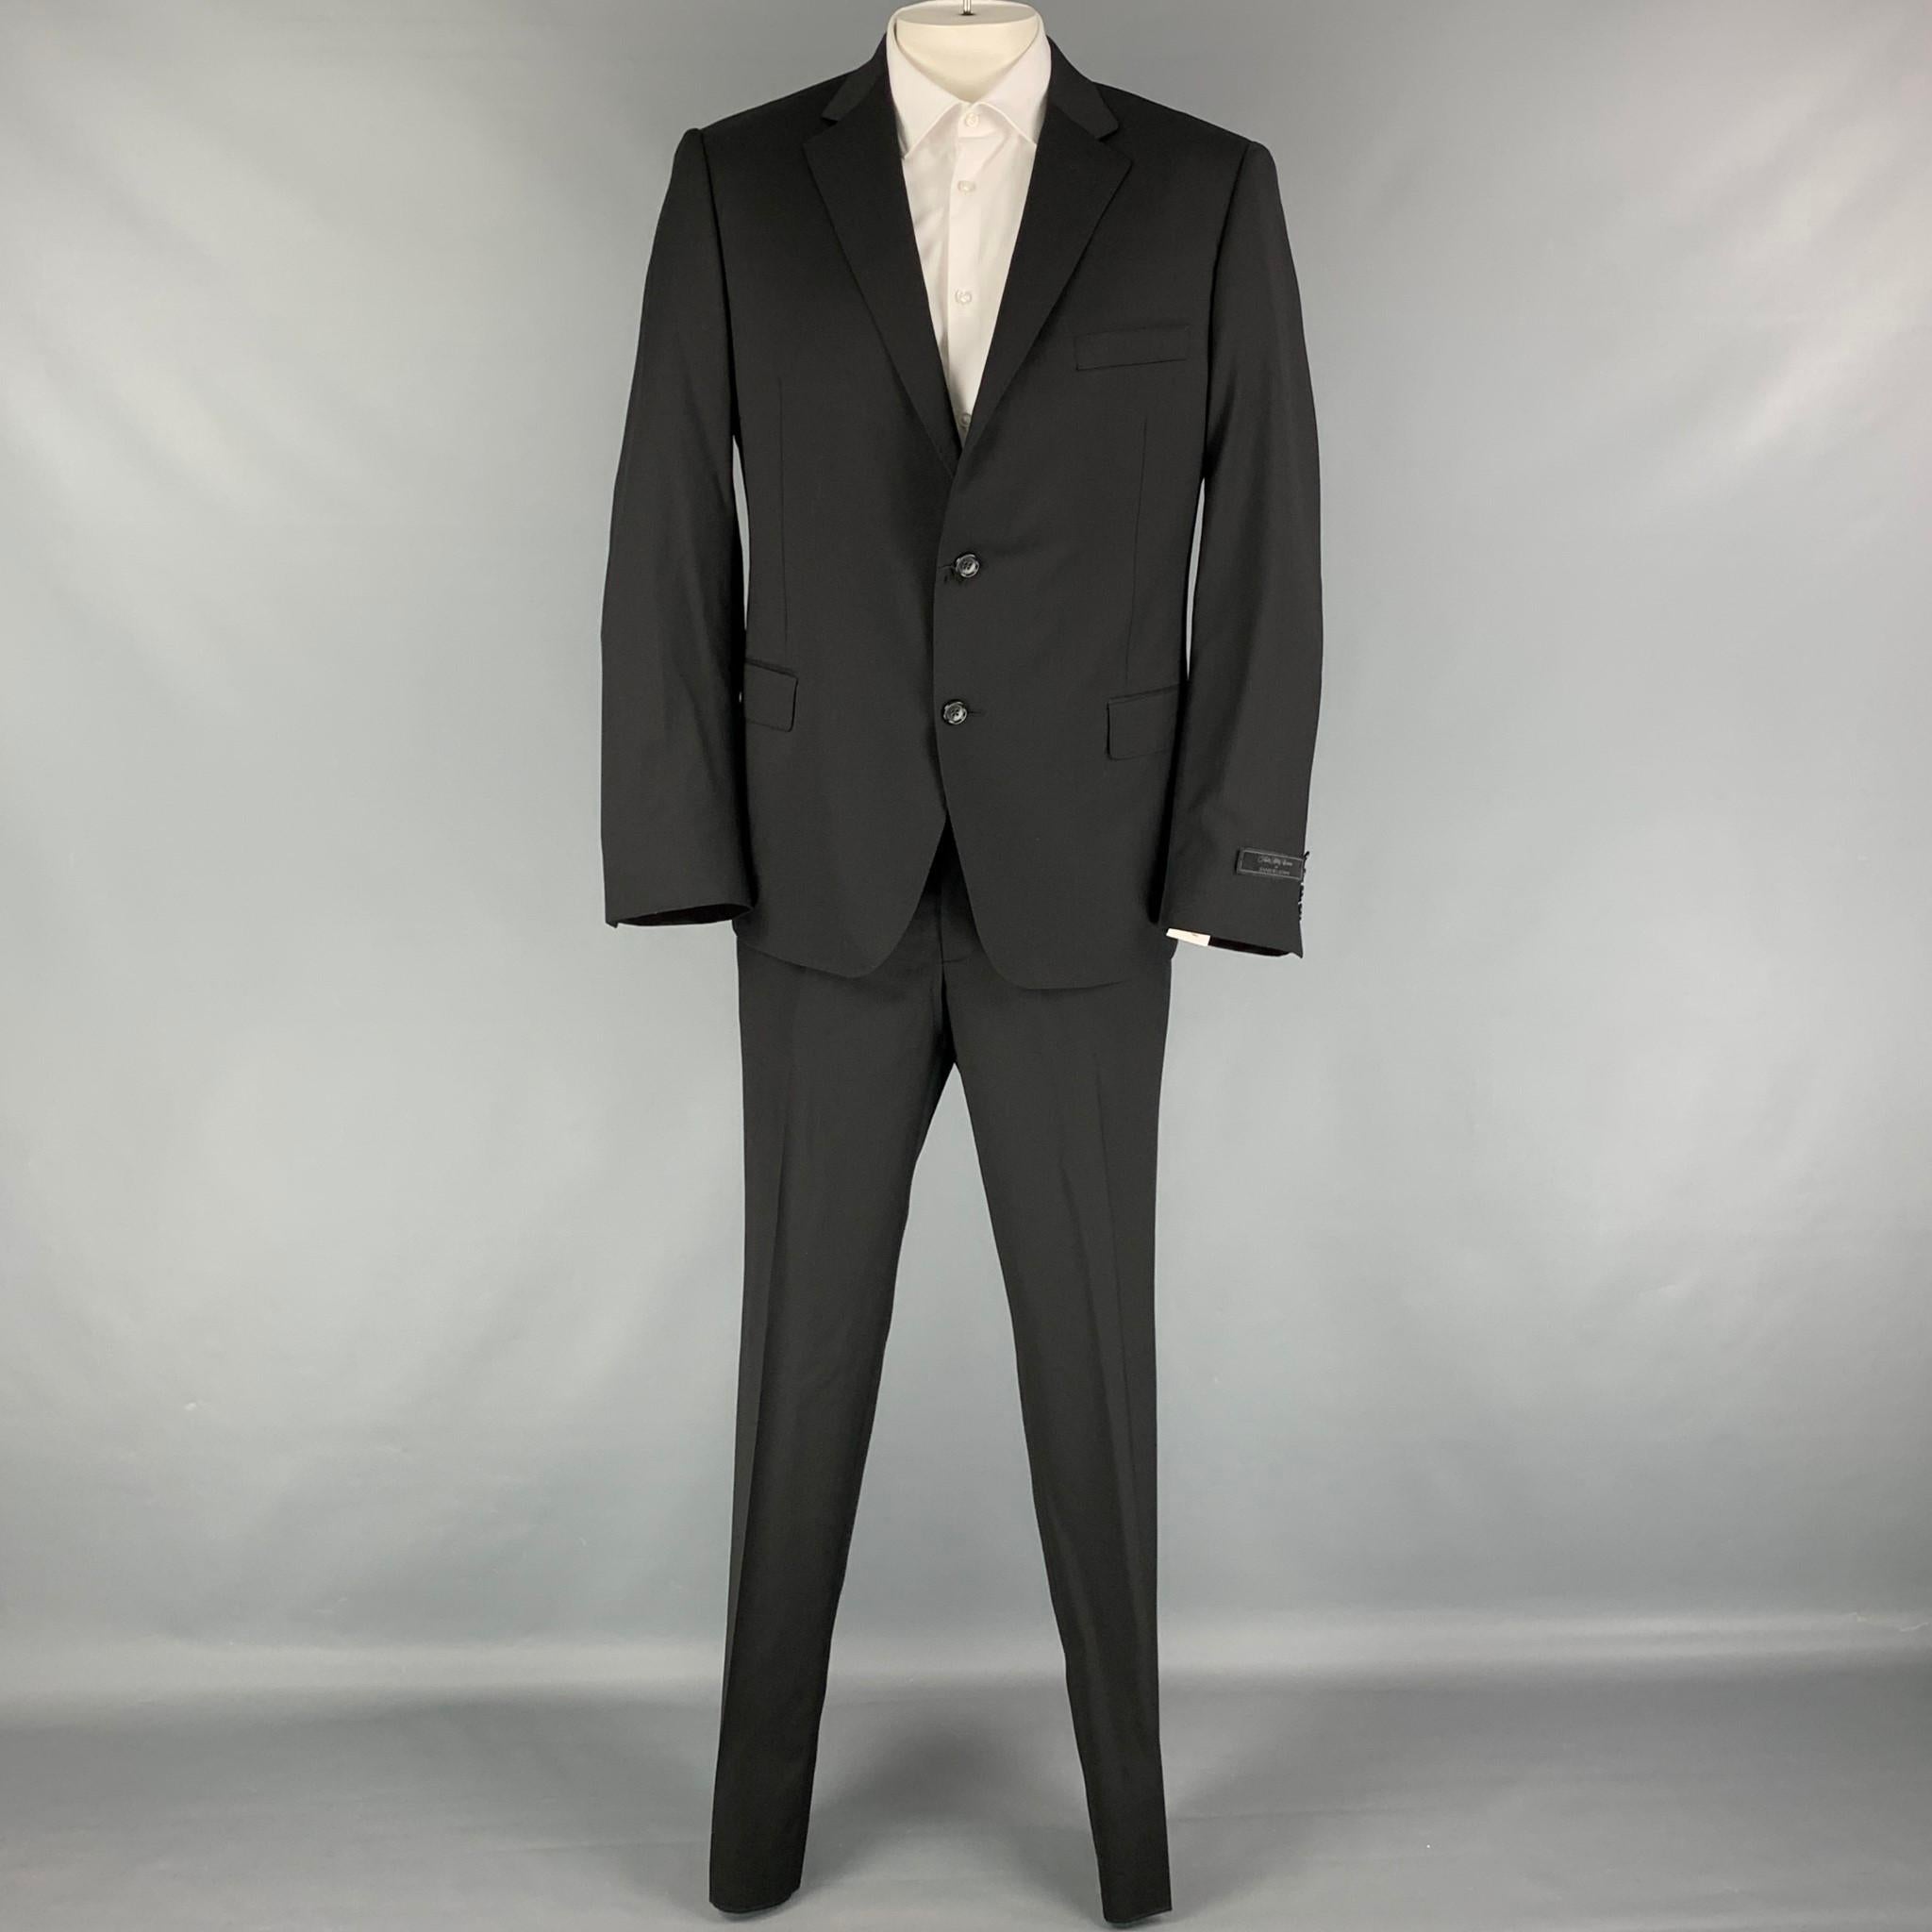 KS FIFTH AVENUE for SAMUELSOHN suit comes in a black wool with a full liner and includes a single breasted, double button sport coat with a notch lapel and matching flat front trousers. Made in Canada.

New With Tags.
Marked: 44-38 R
Original Retail